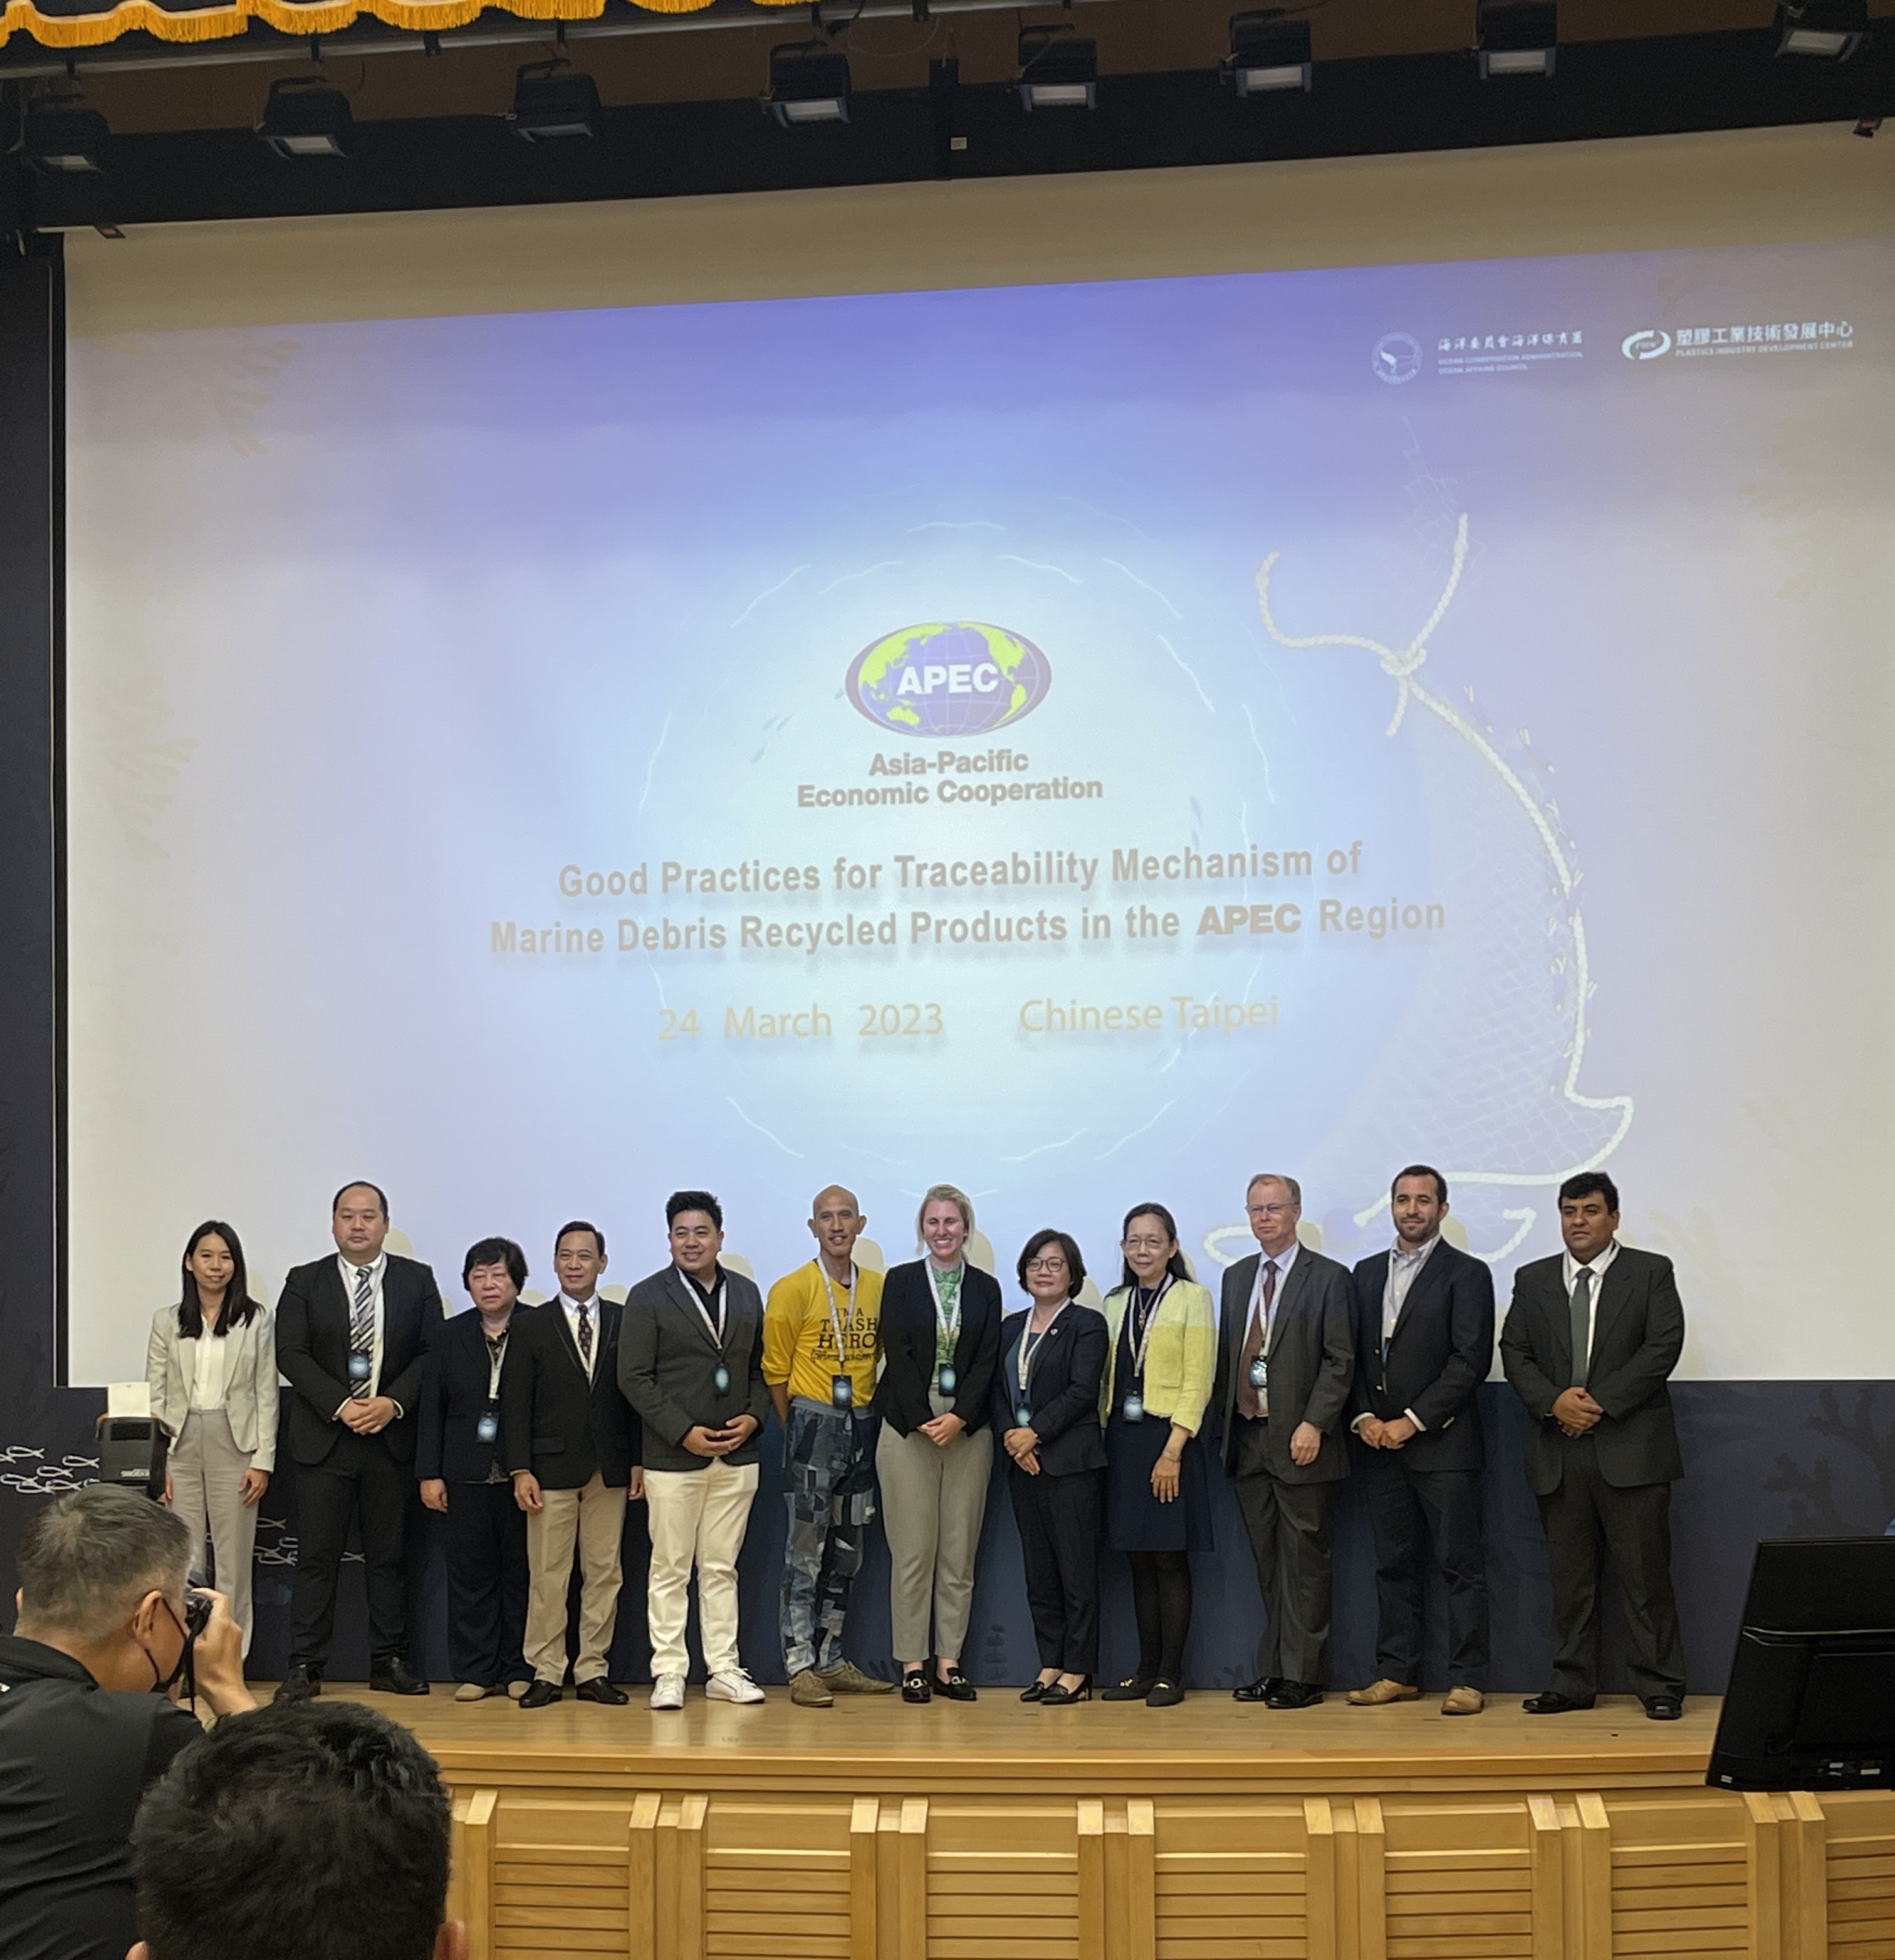 Plastech Group Actively Participates in APEC Gathering on Building a Traceability Mechanism of Recycled Marine Debris Products